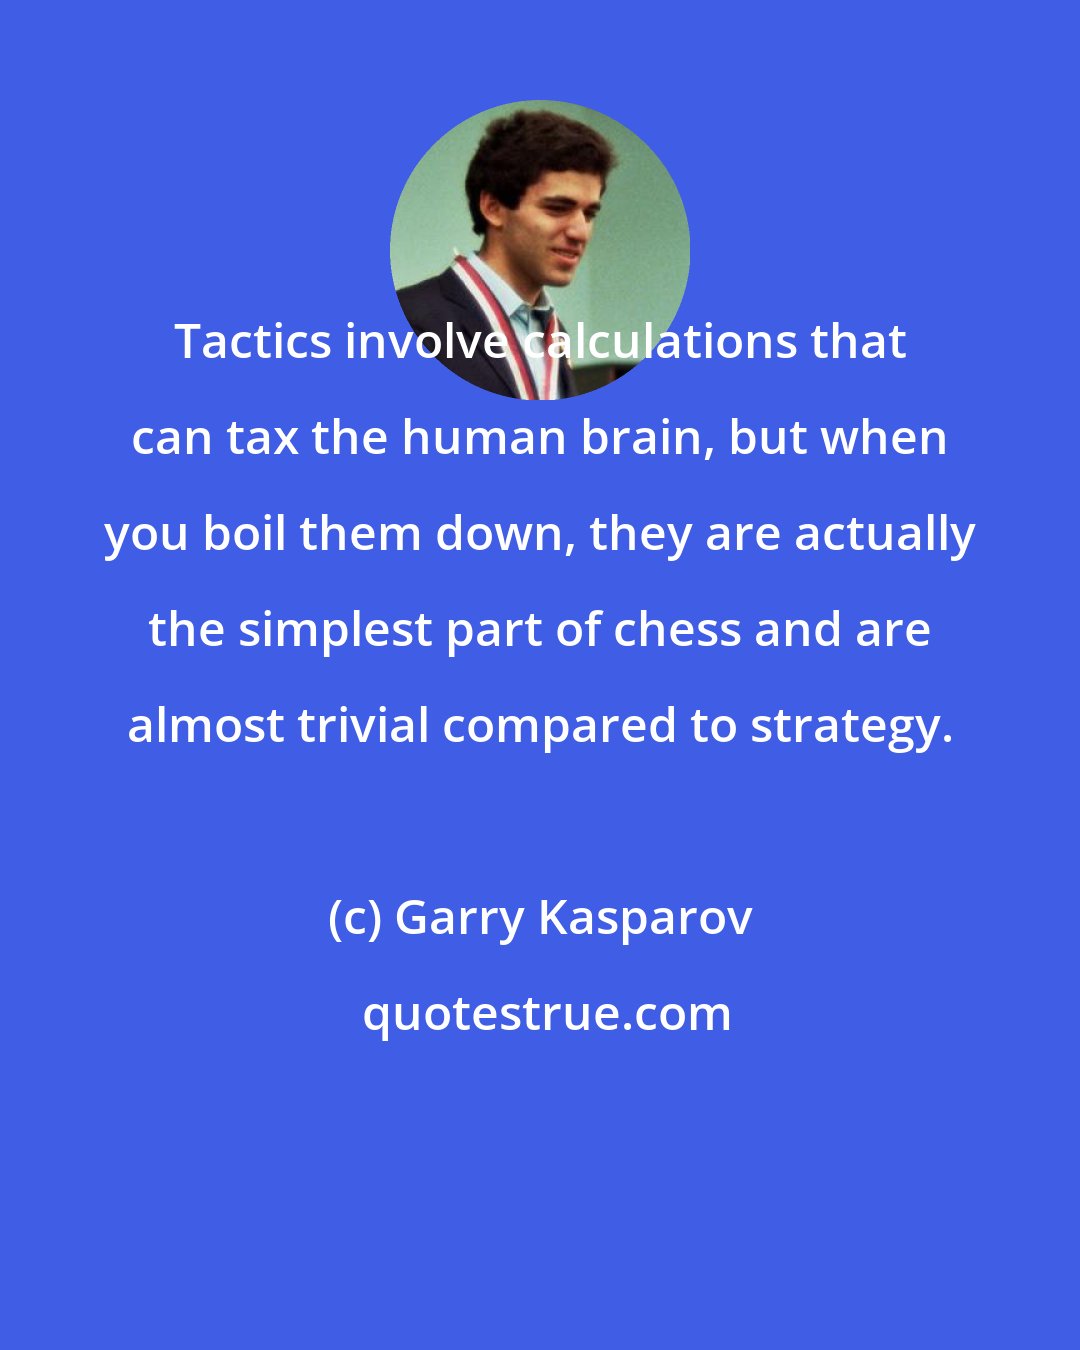 Garry Kasparov: Tactics involve calculations that can tax the human brain, but when you boil them down, they are actually the simplest part of chess and are almost trivial compared to strategy.